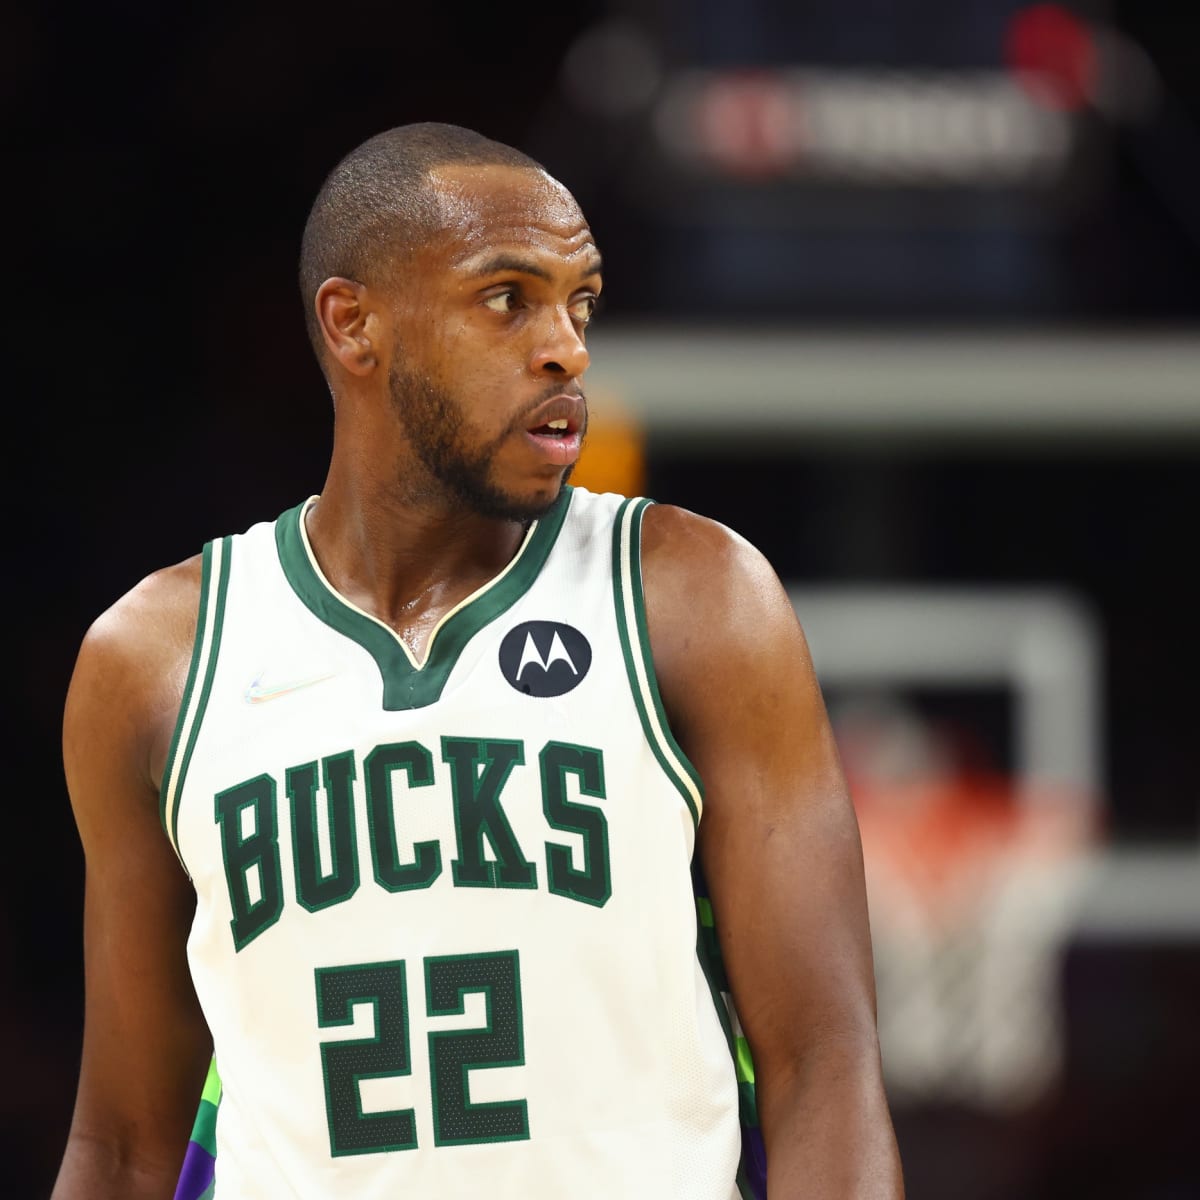 How Tall Is Khris Middleton? News, Age, Awards, & More 2022